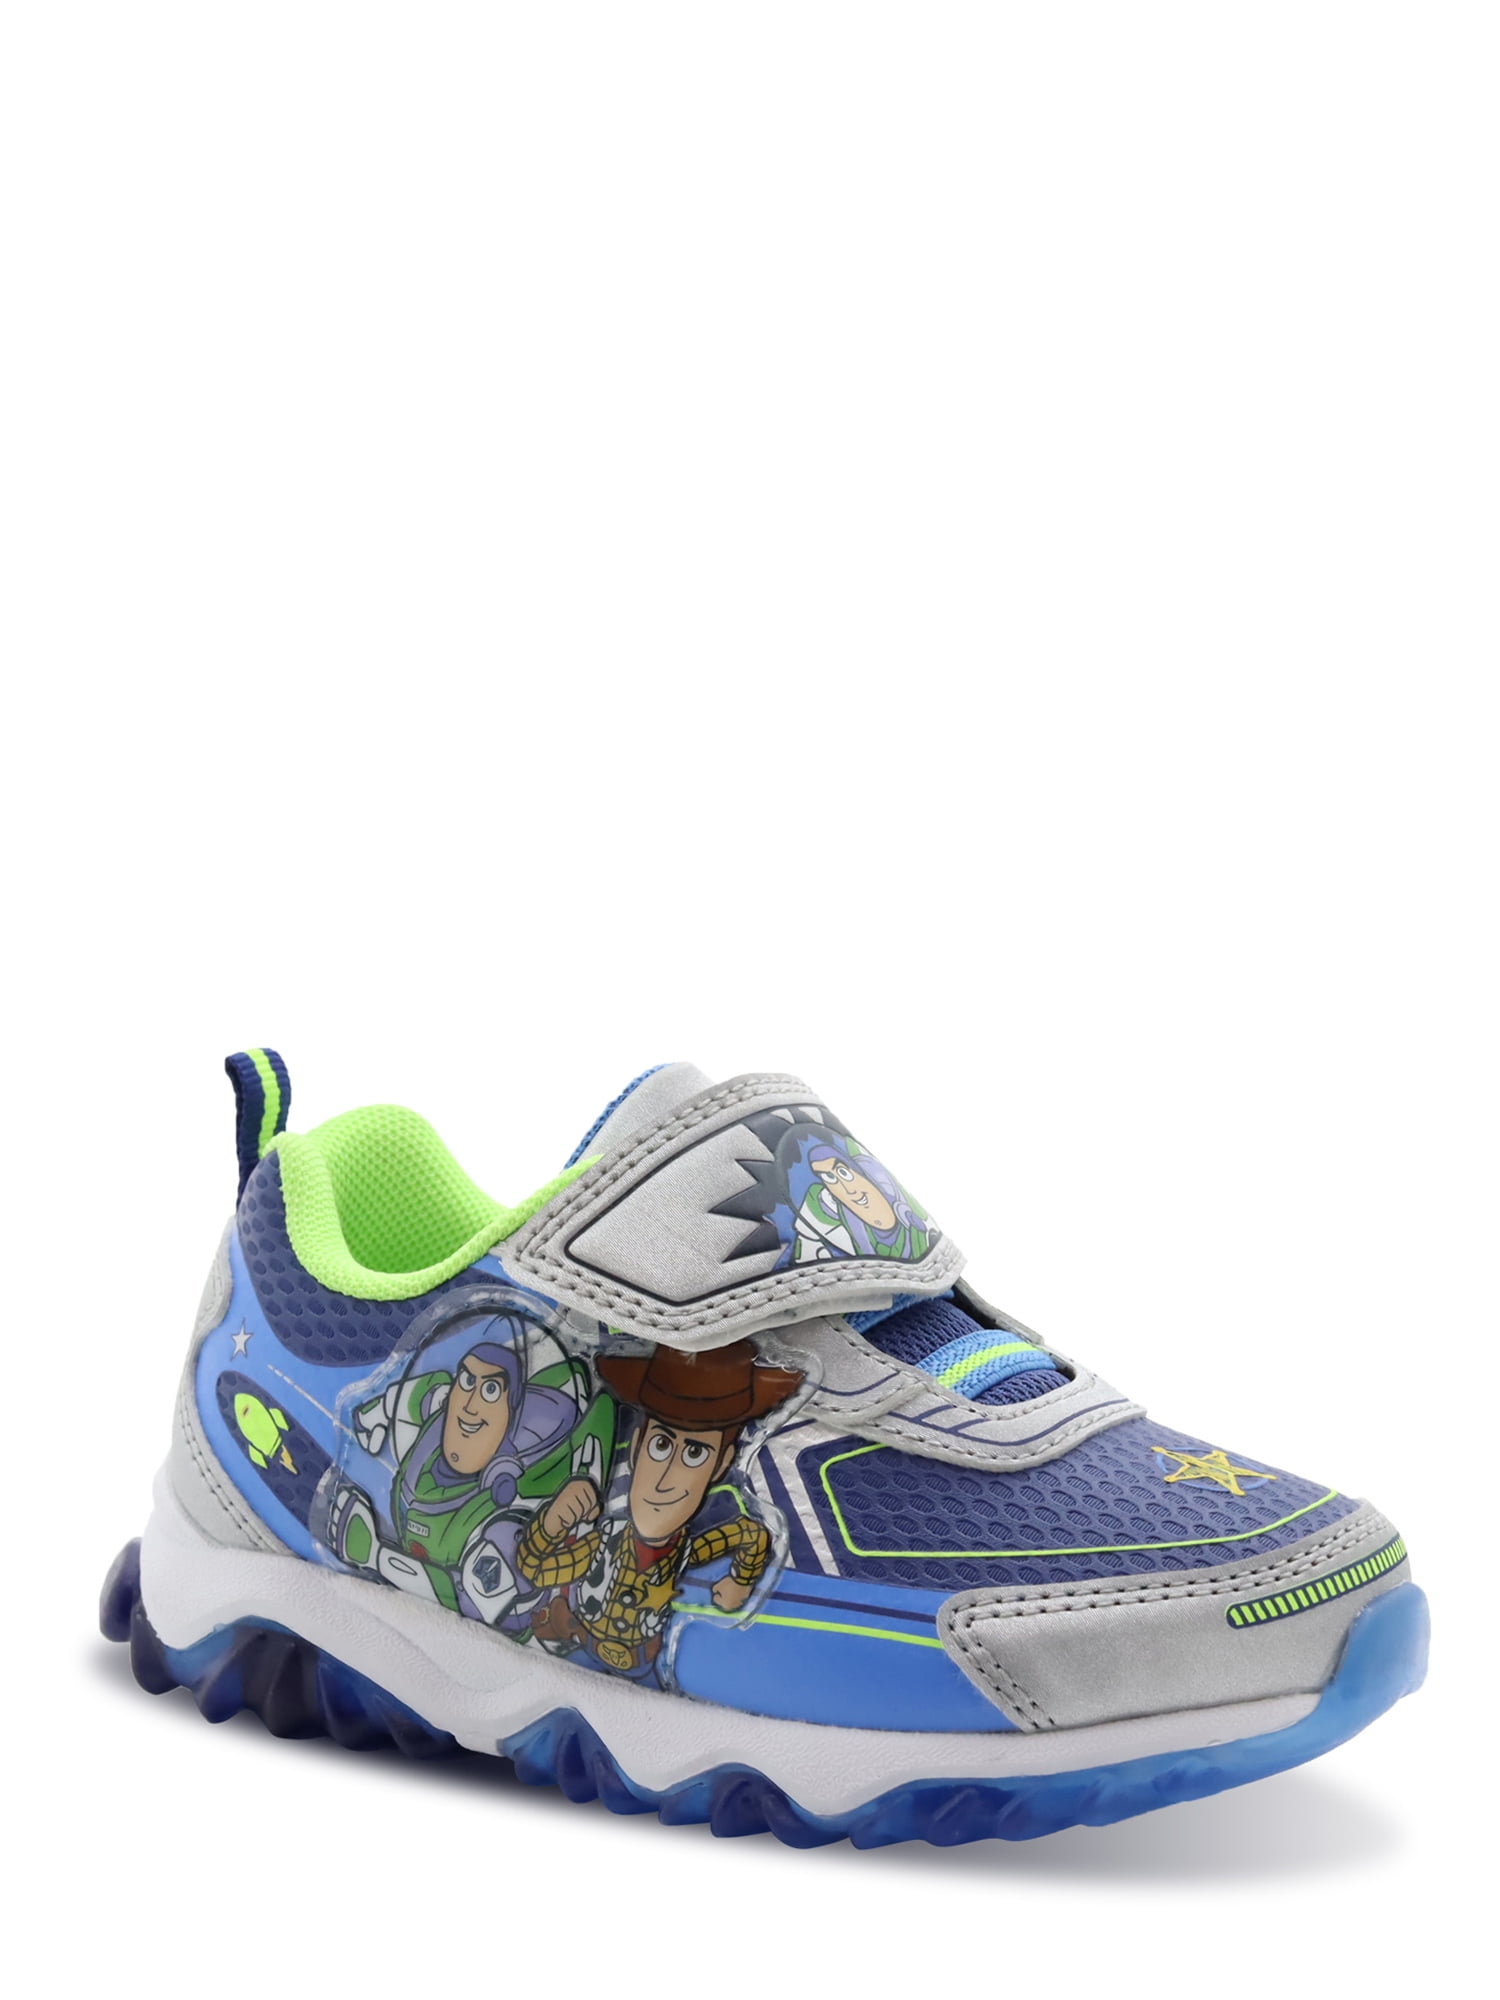 9 TOY STORY 4 BUZZ LIGHTYEAR Light-Up Sneakers Shoes Sizes 8 11 or 12 NIB